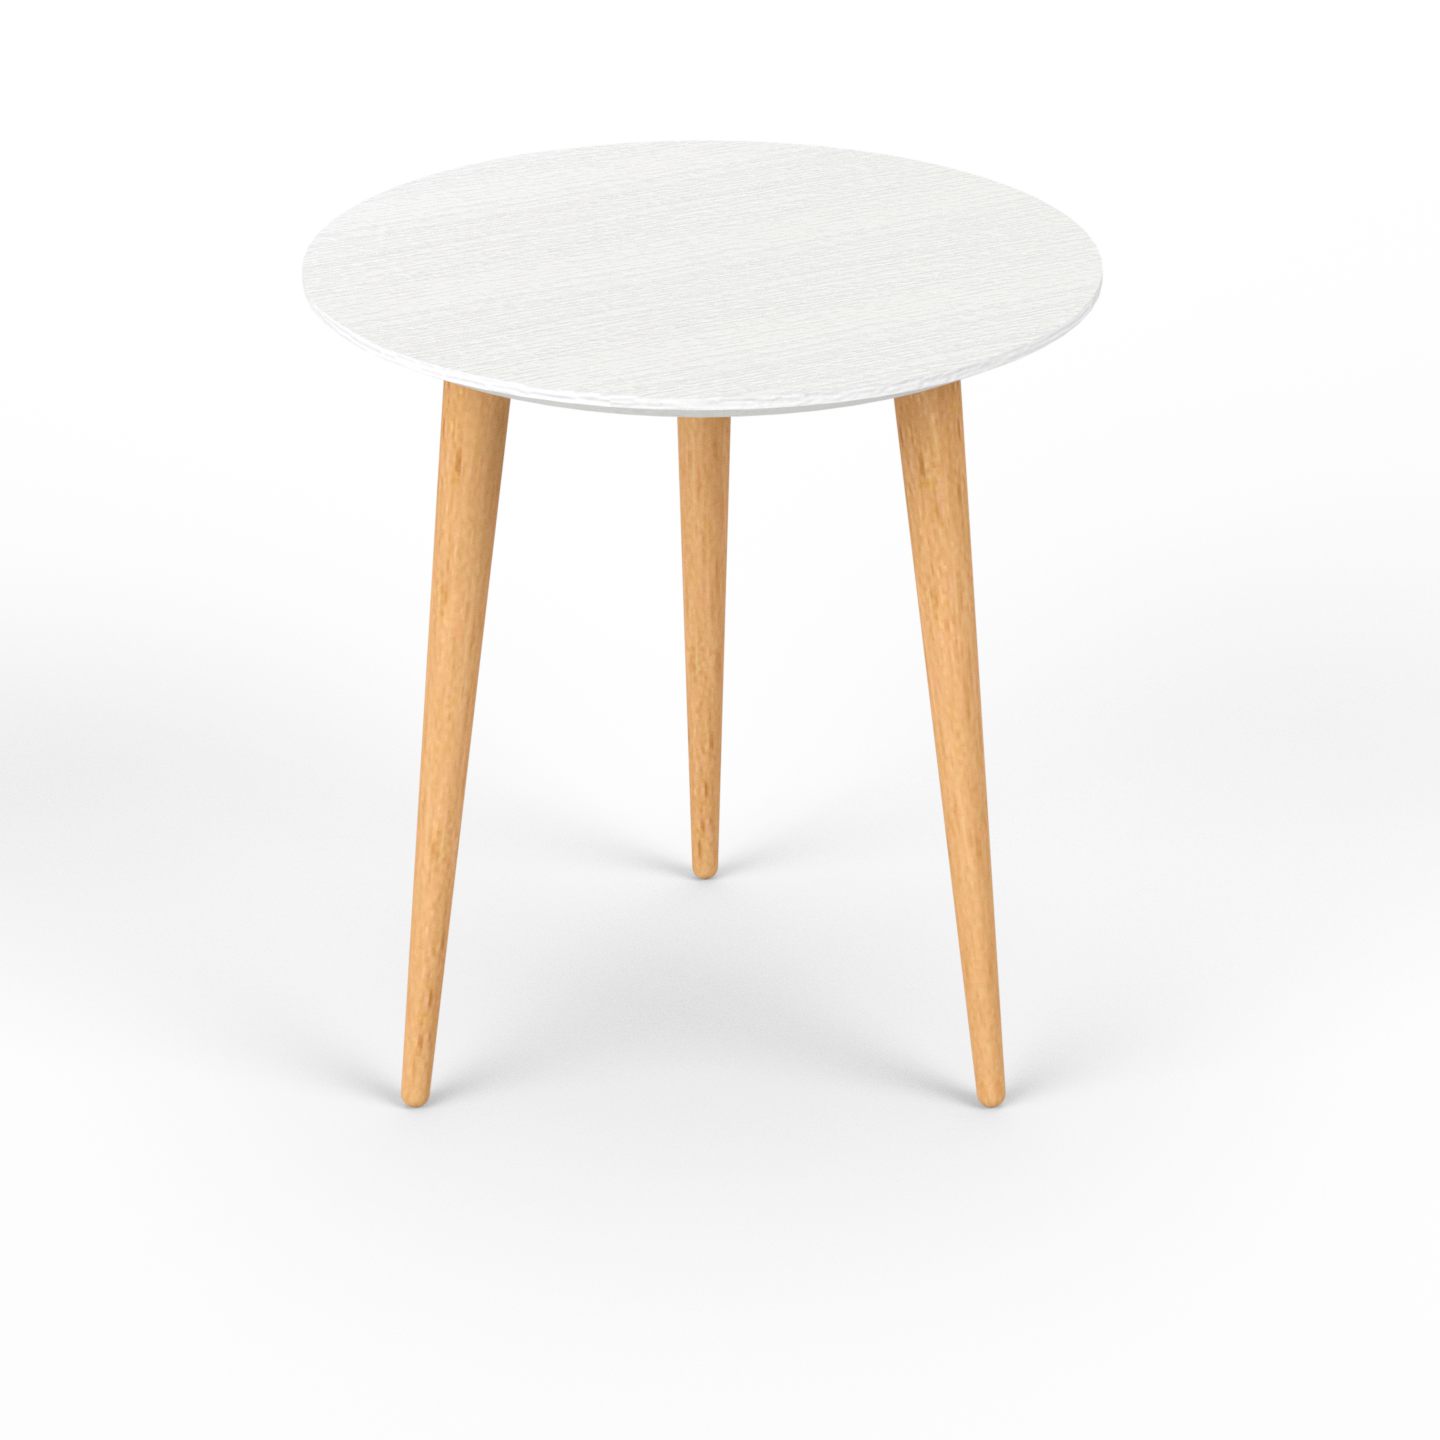 A-Small H-44 Coffee Table